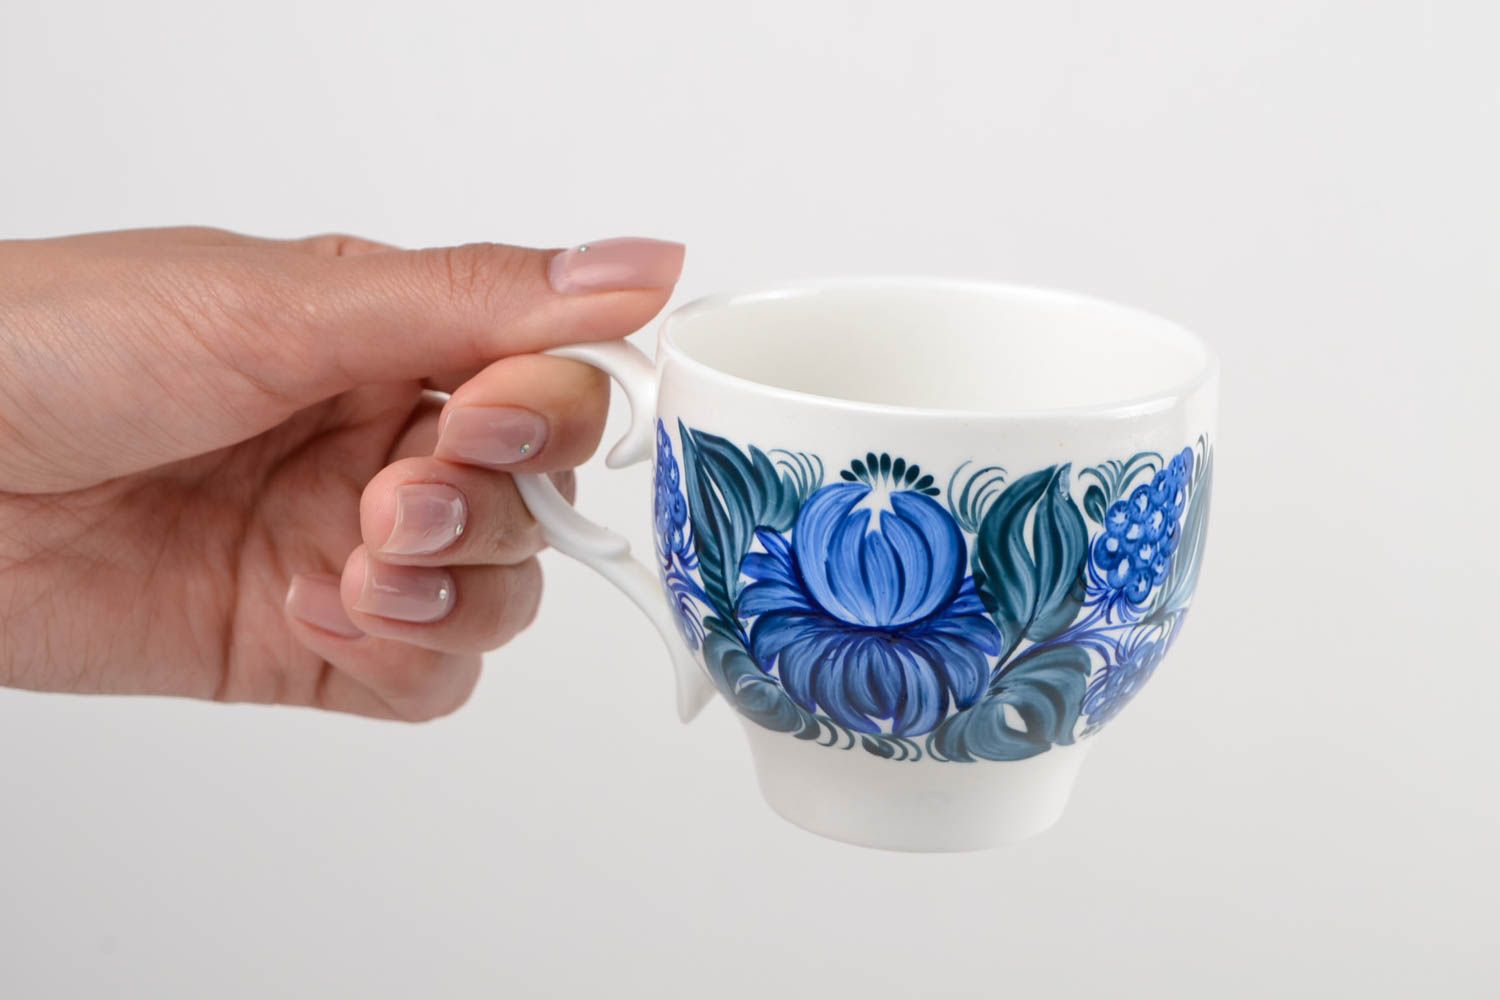 6 oz ceramic porcelain white and blue cup with handle and flower pattern photo 2